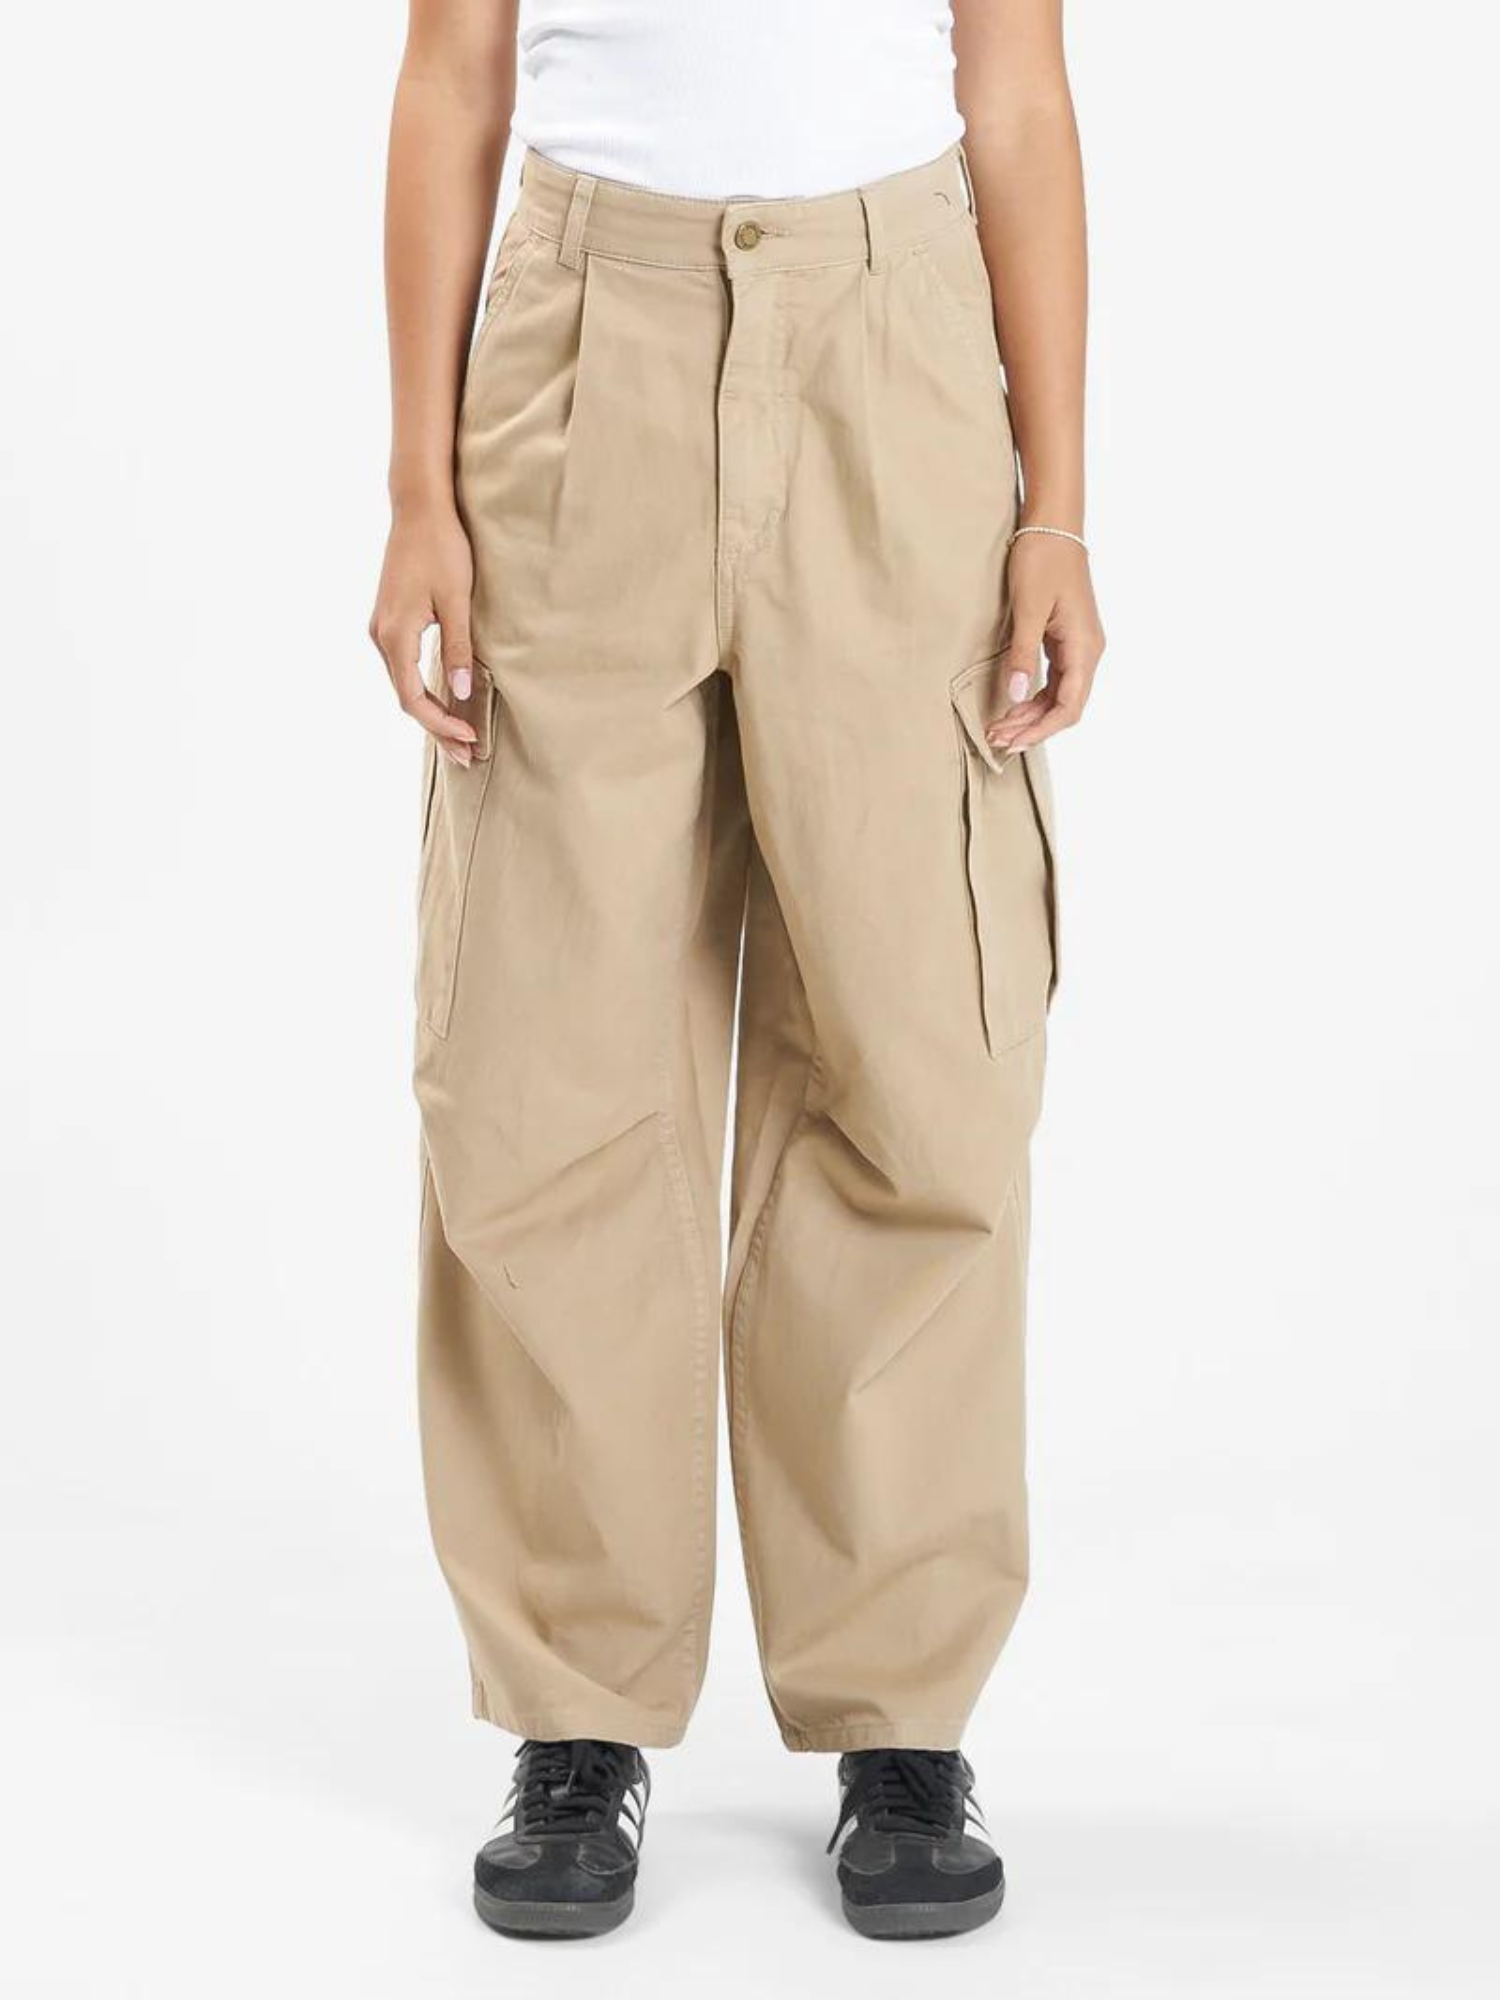 Thrills Union Slouch Pant - Sand Brown